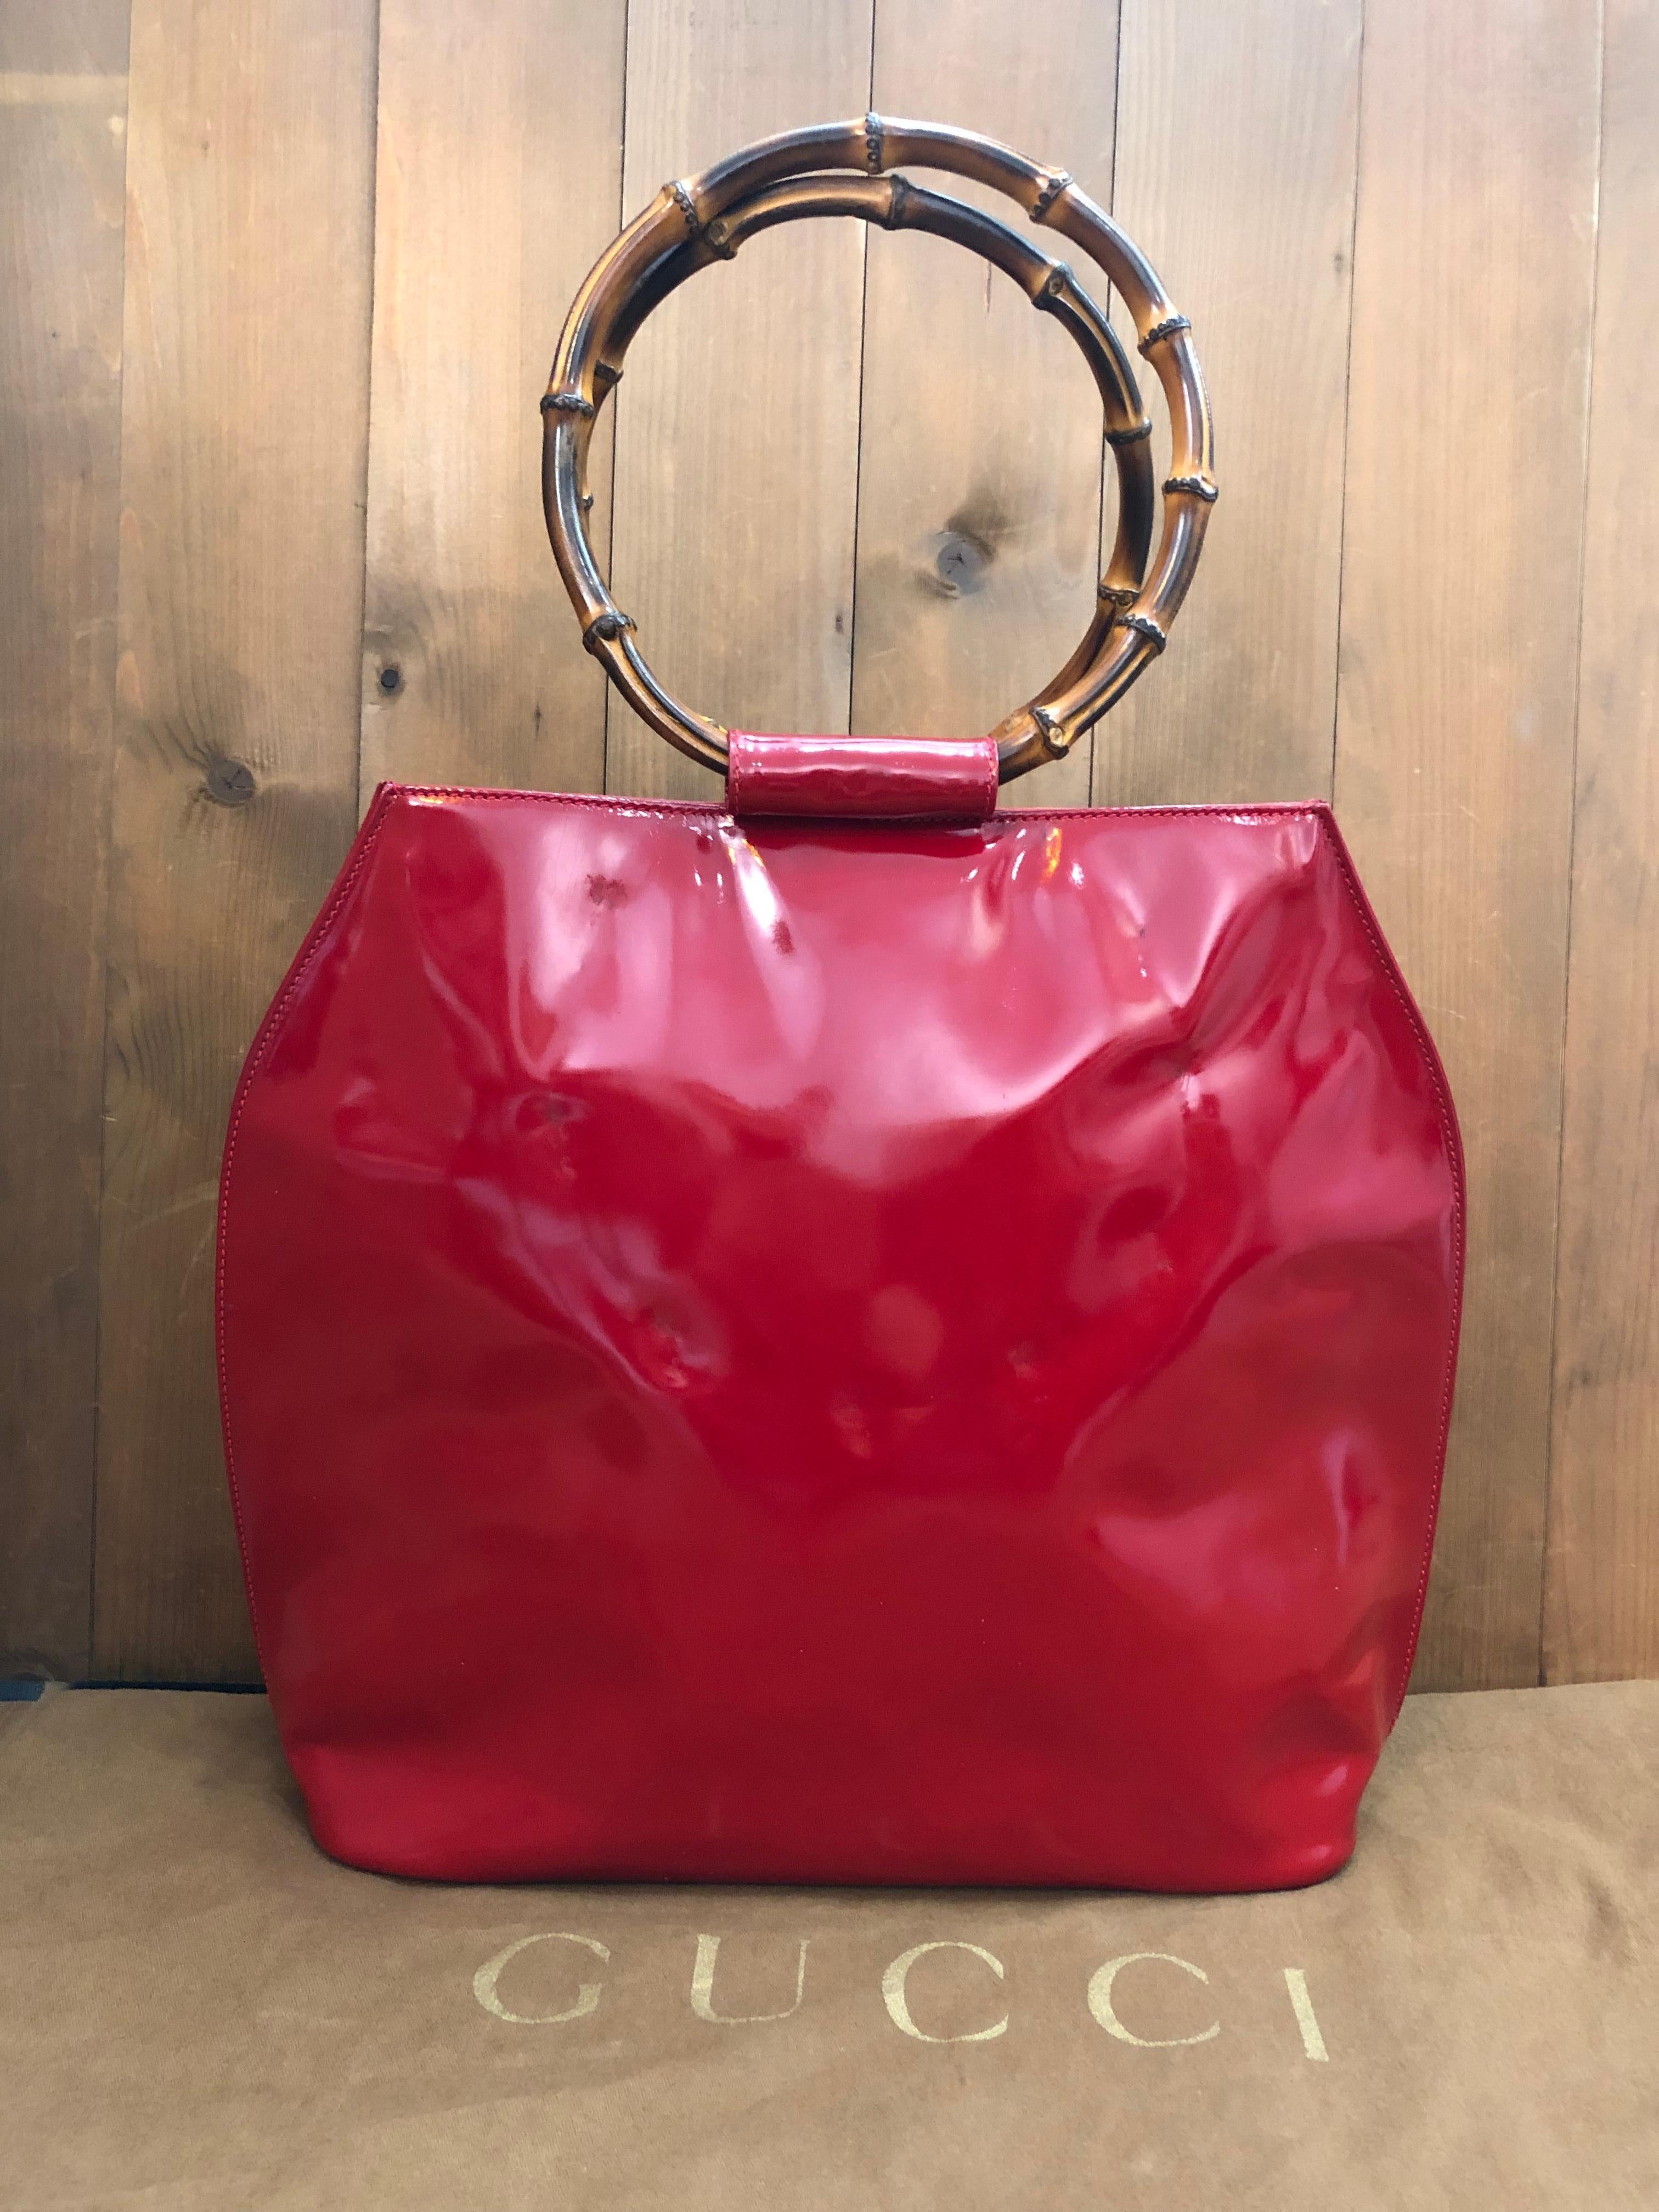 This vintage GUCCI top handle shoulder tote bag is crafted of patent leather in red featuring two massive bamboo ring handles. Top magnetic snap closure opens to a new interior in beige featuring a zippered pocket. Made in Italy. Measures